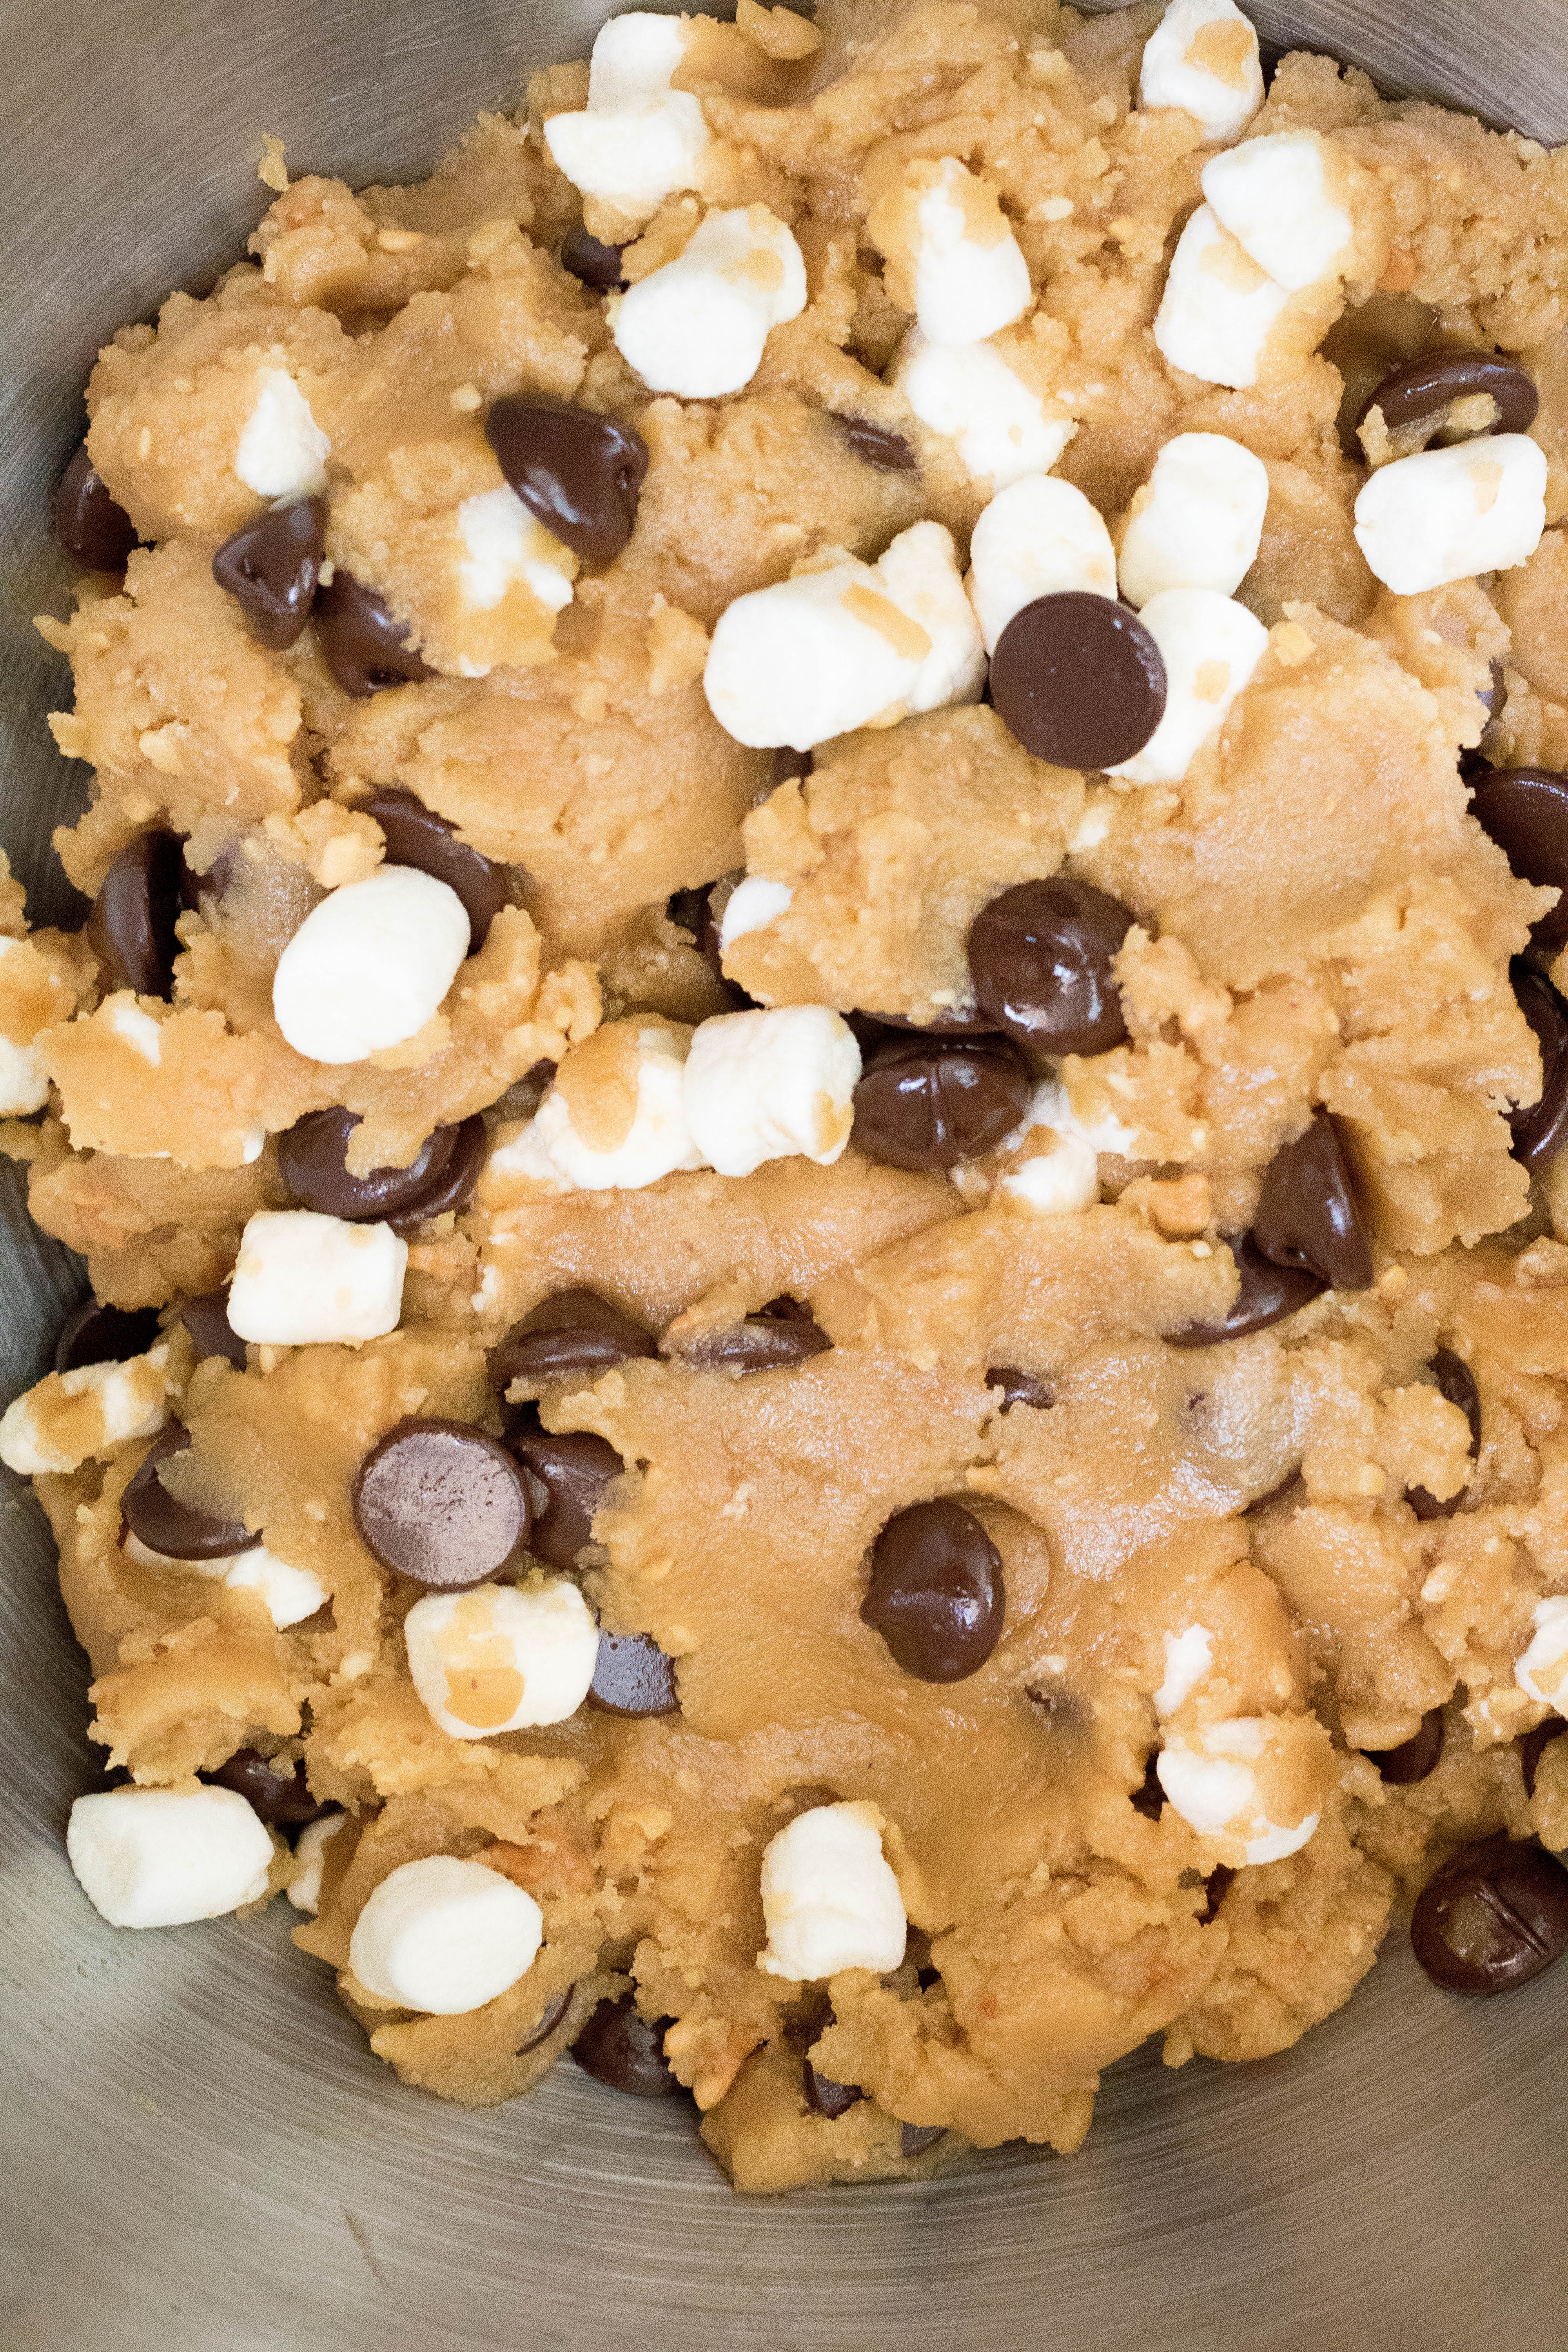 What you will need to make these S'mores cookies